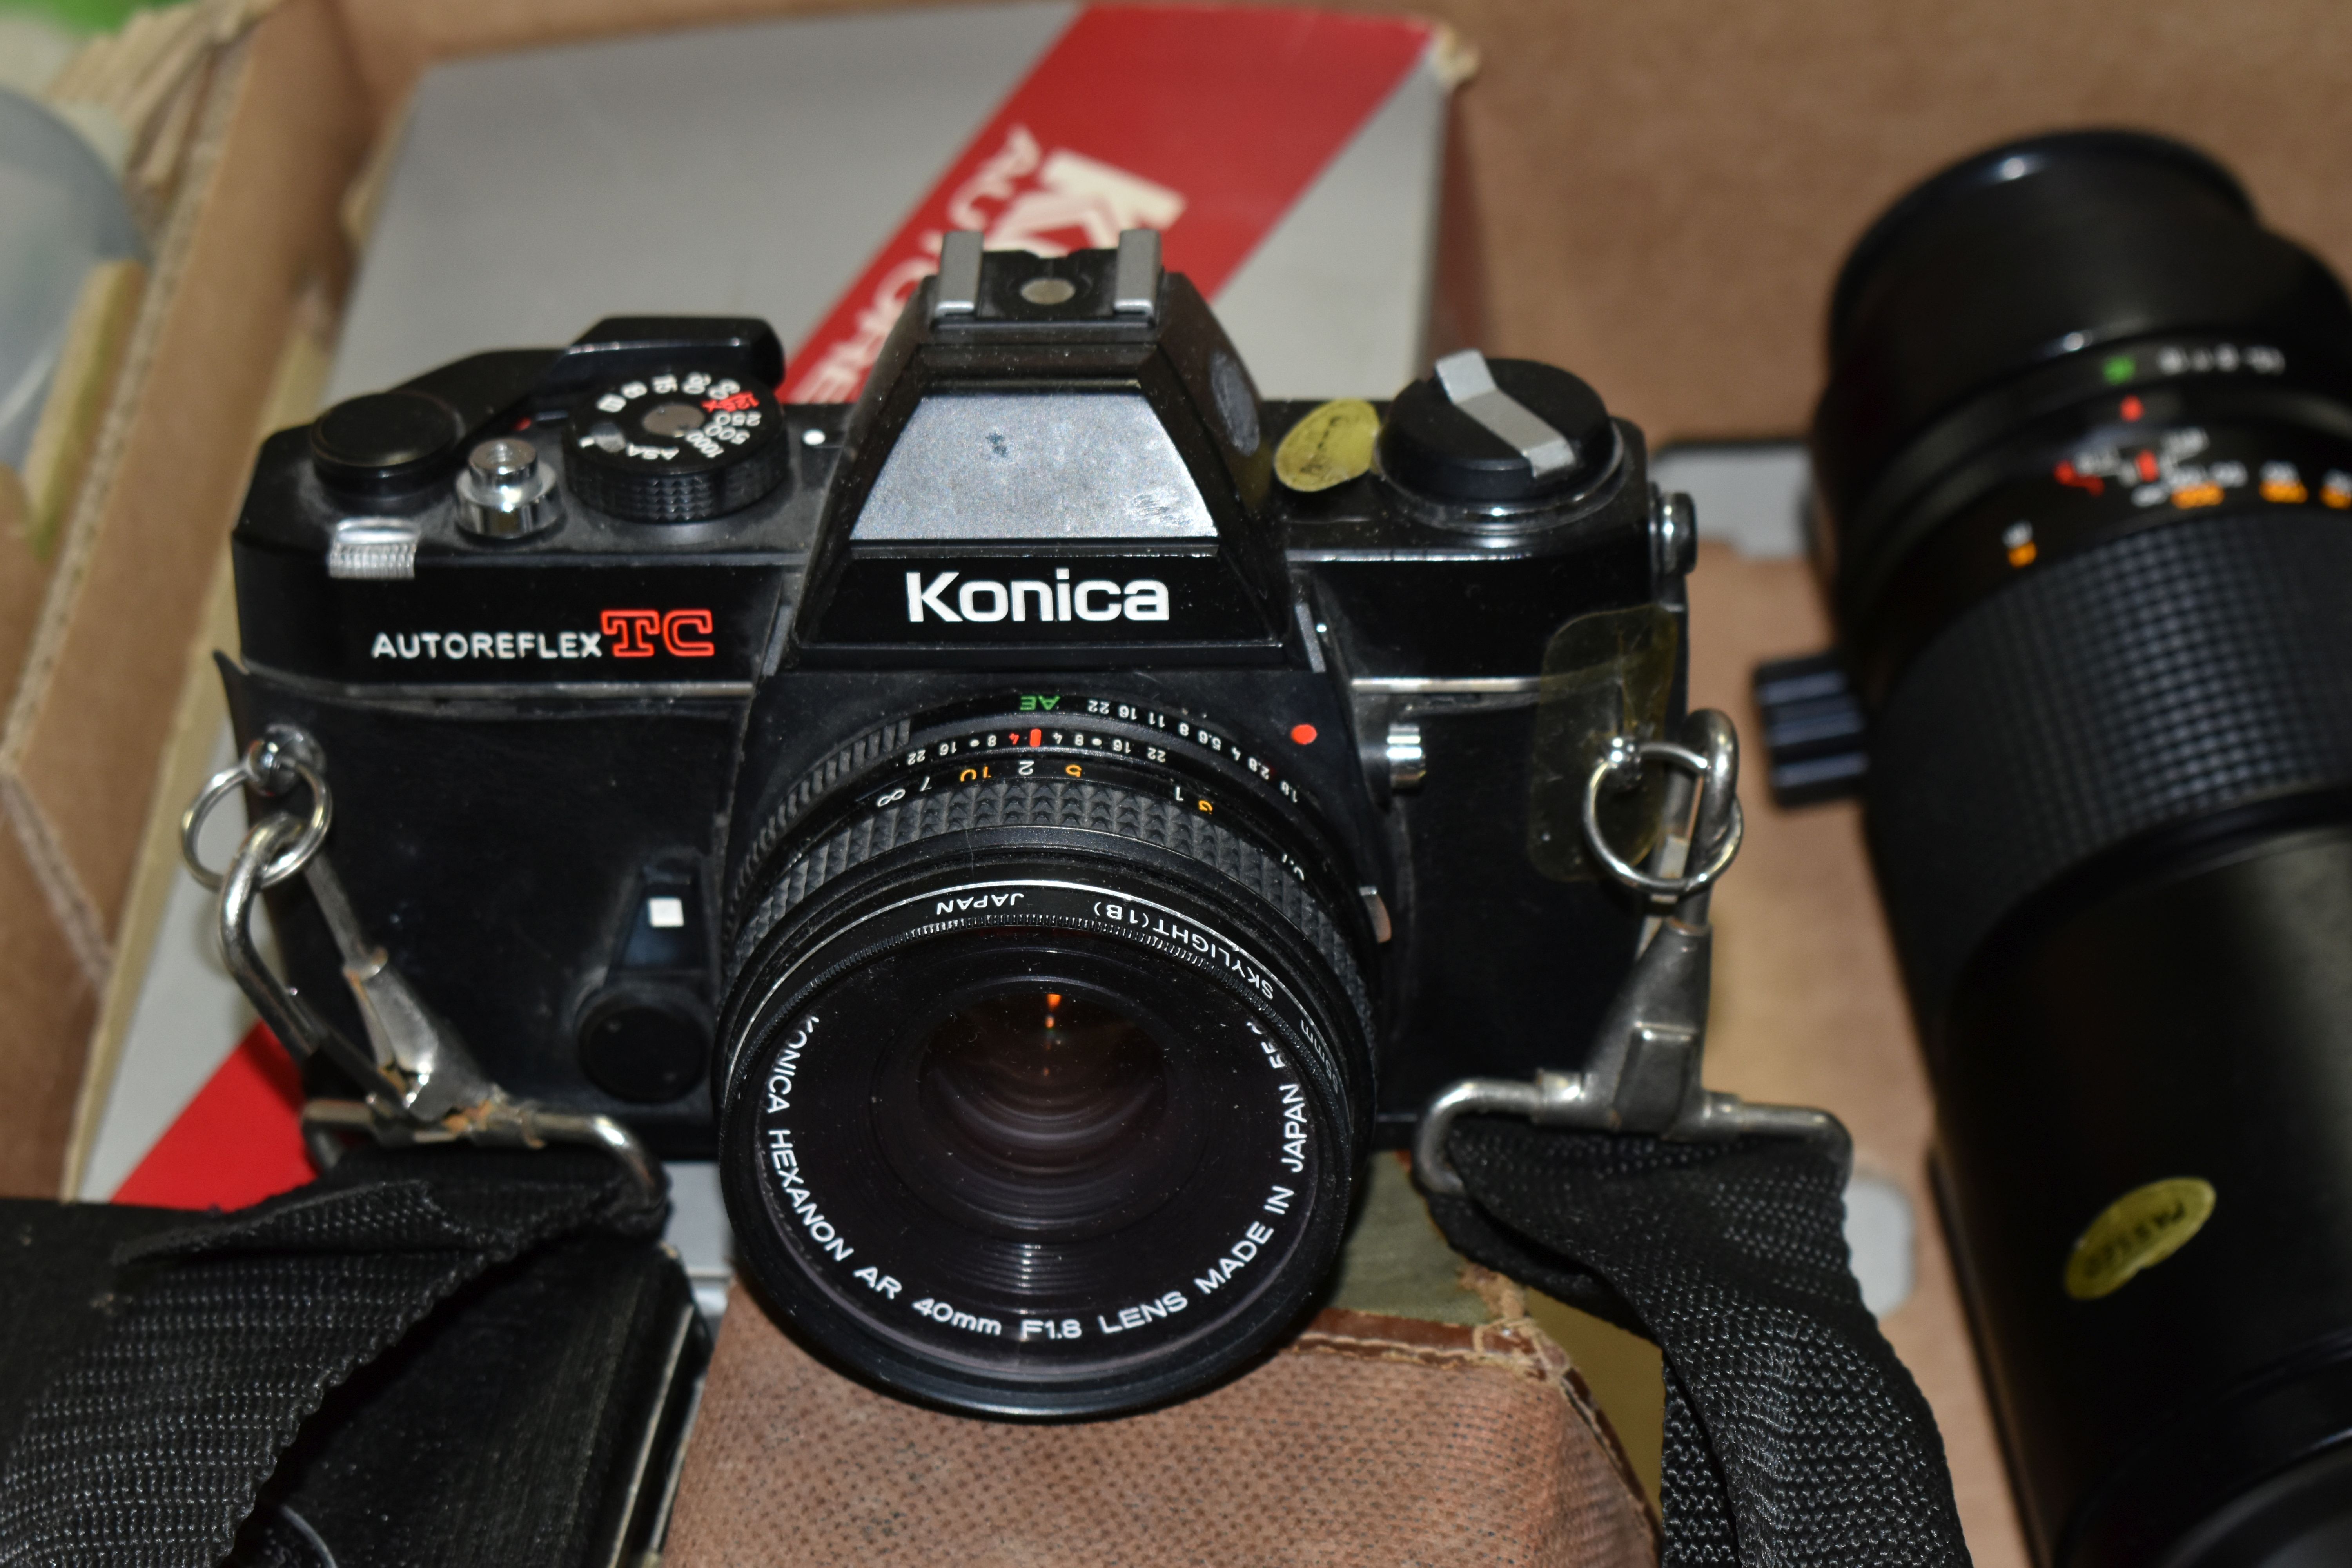 ONE BOX OF VINTAGE CAMERAS AND PHOTOGRAPHIC EQUIPMENT, to include a Konica Auto-reflex TC camera - Image 2 of 3